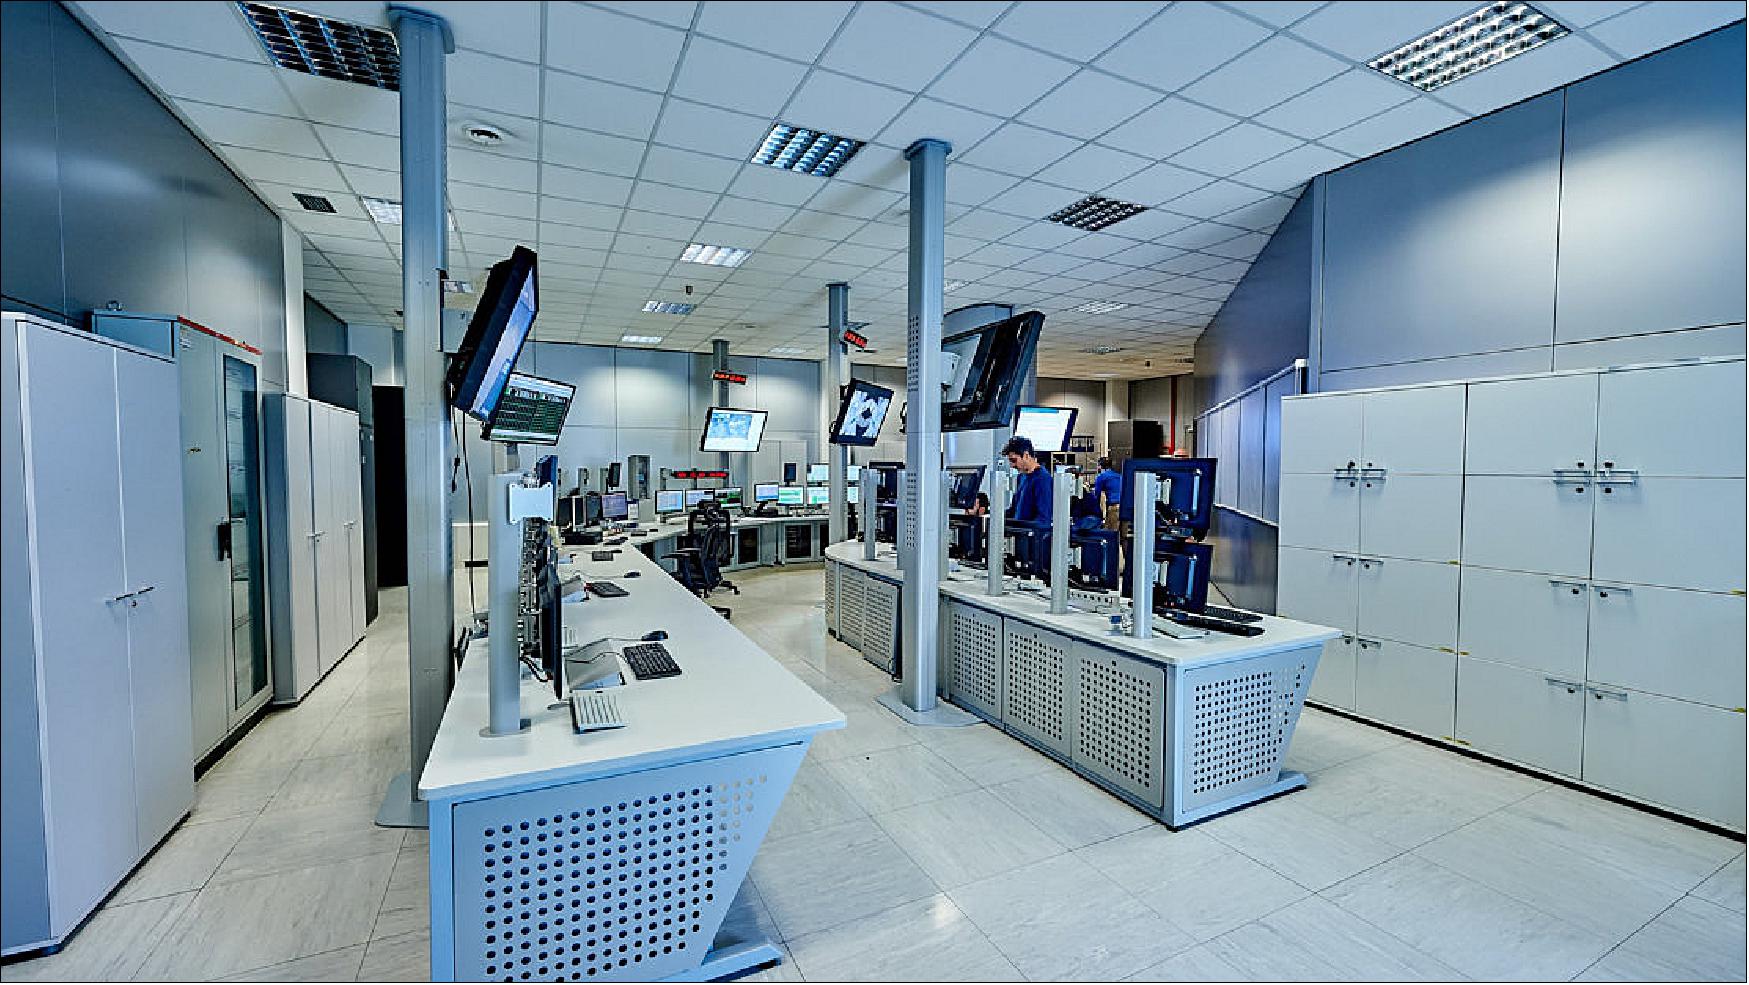 Figure 108: Galileo's Control Center in Fucino is used to oversee the satellites' navigation payloads and services (image credit: GSA)